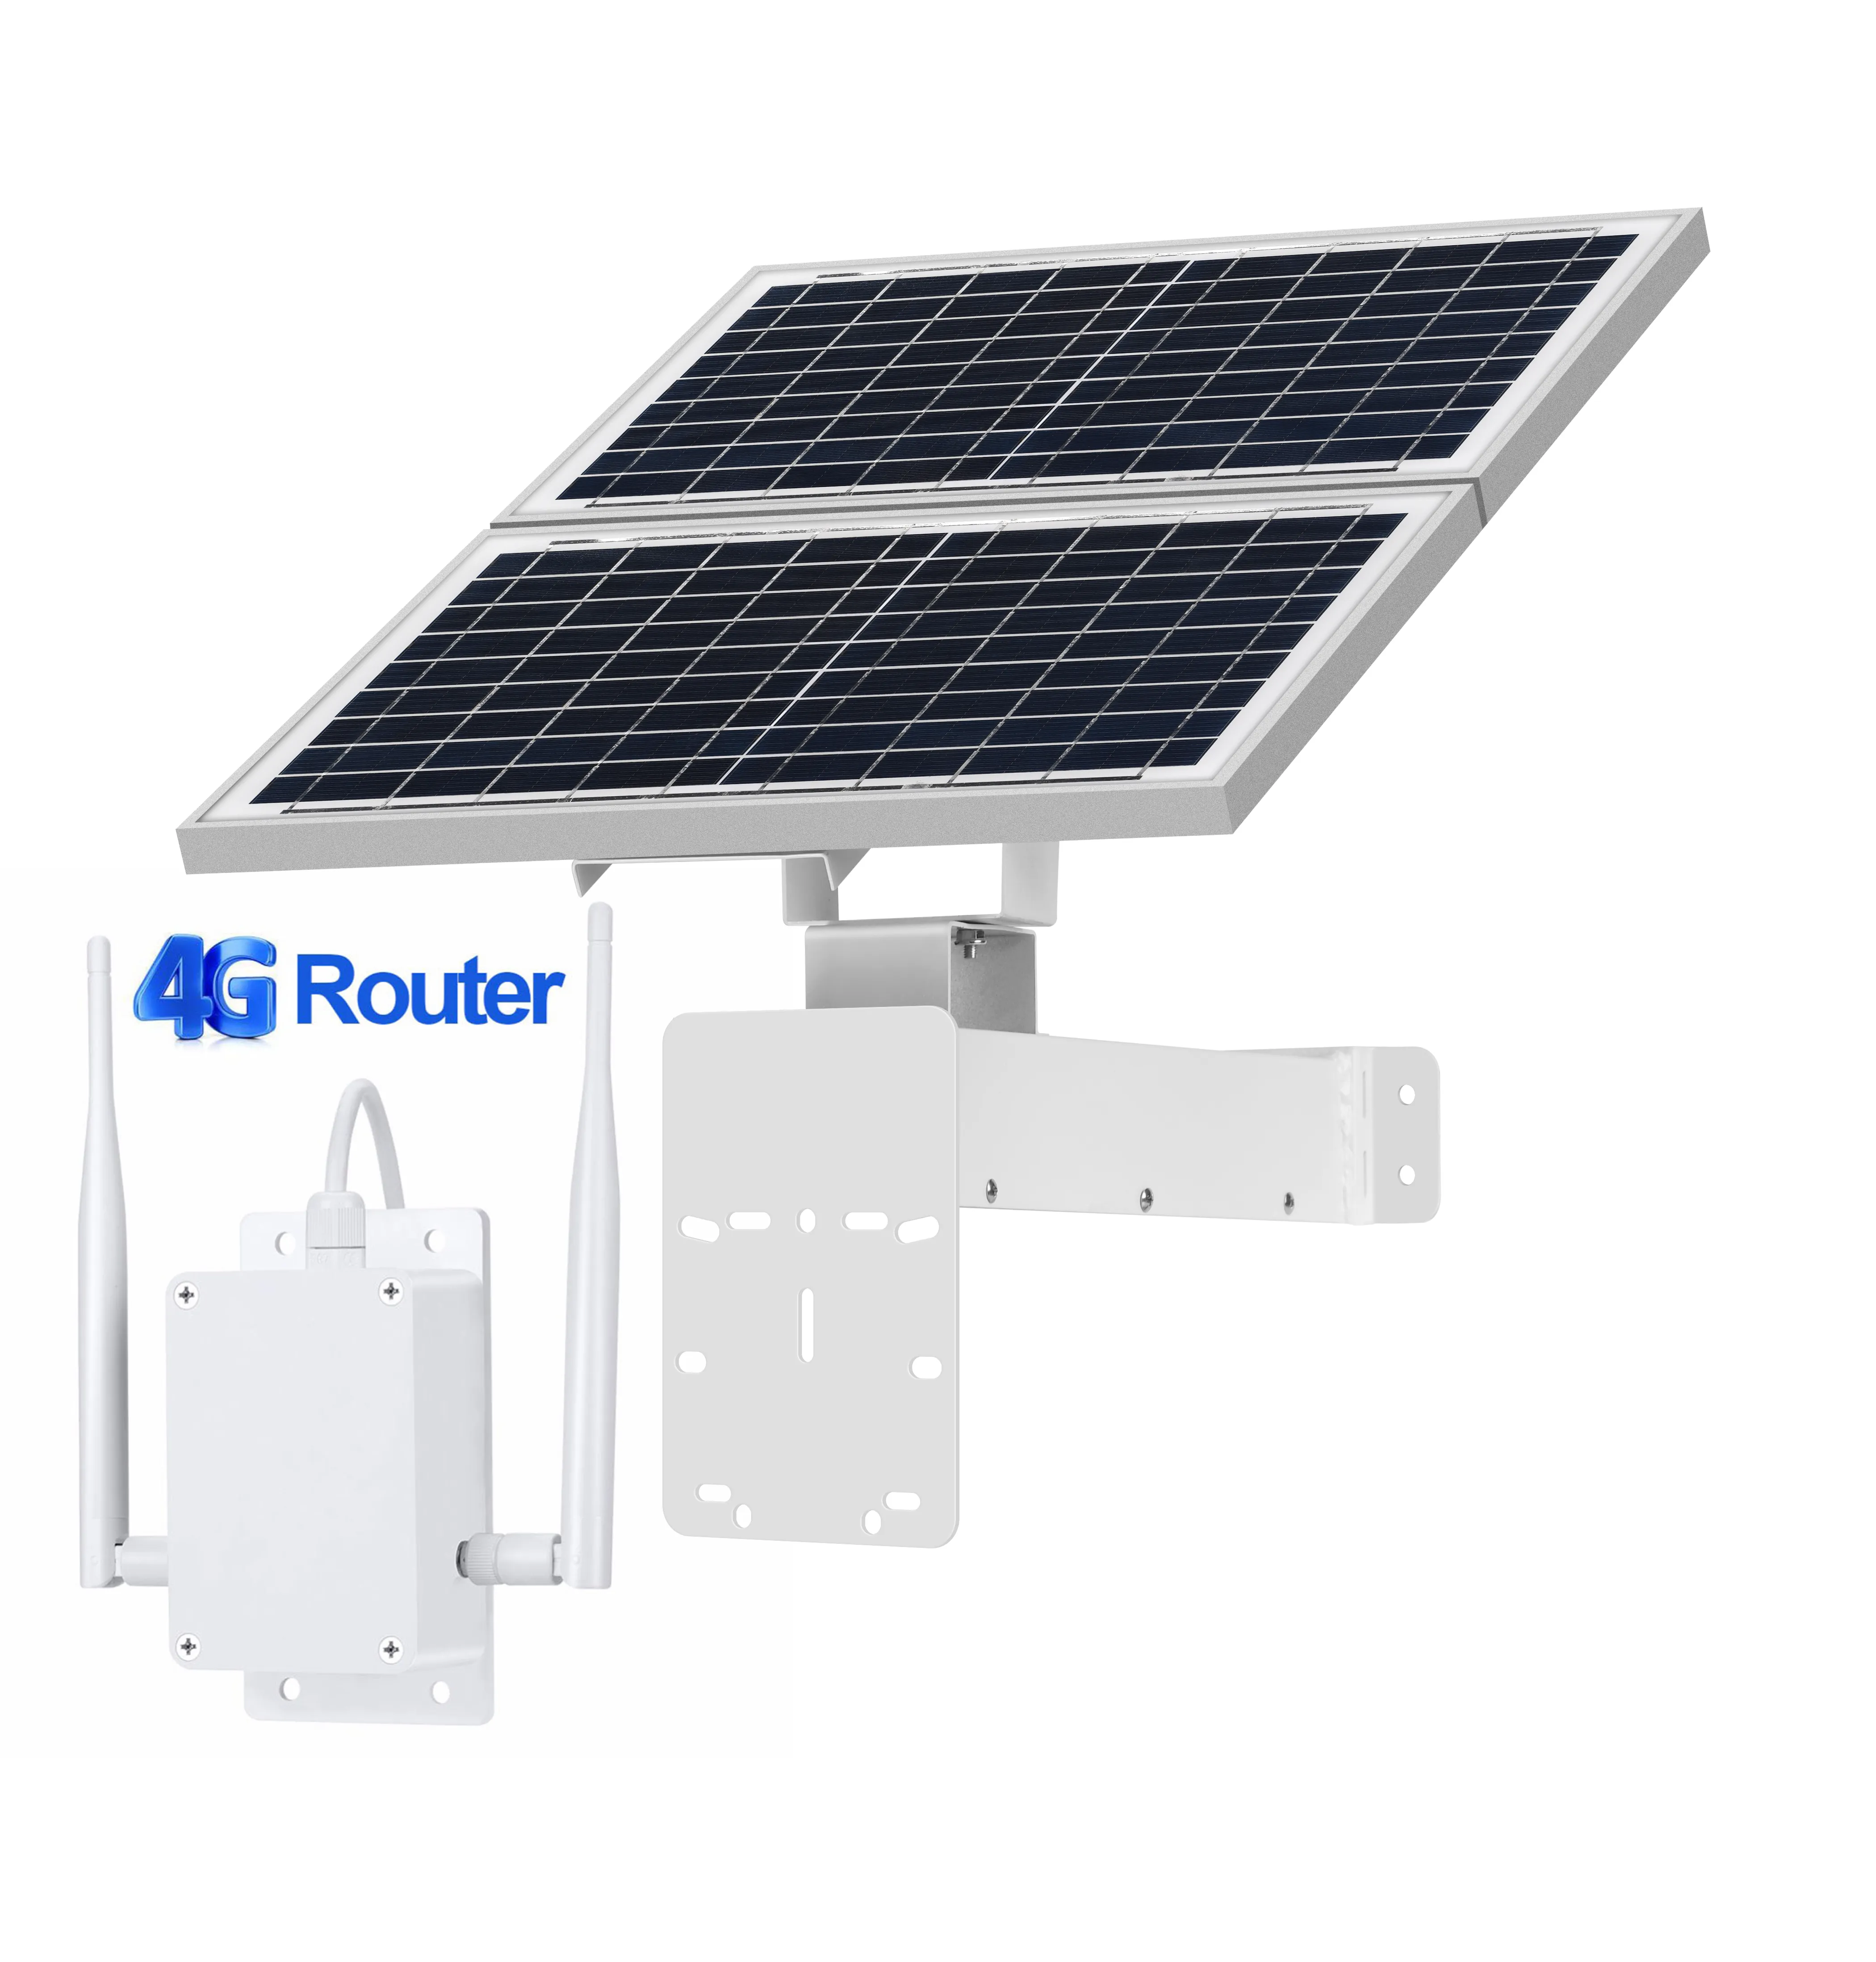 USIM/SIM Micro SIM card slot Outdoor Solar 4G Router 4G band waterproof Support for multiple systems Multi-country frequency